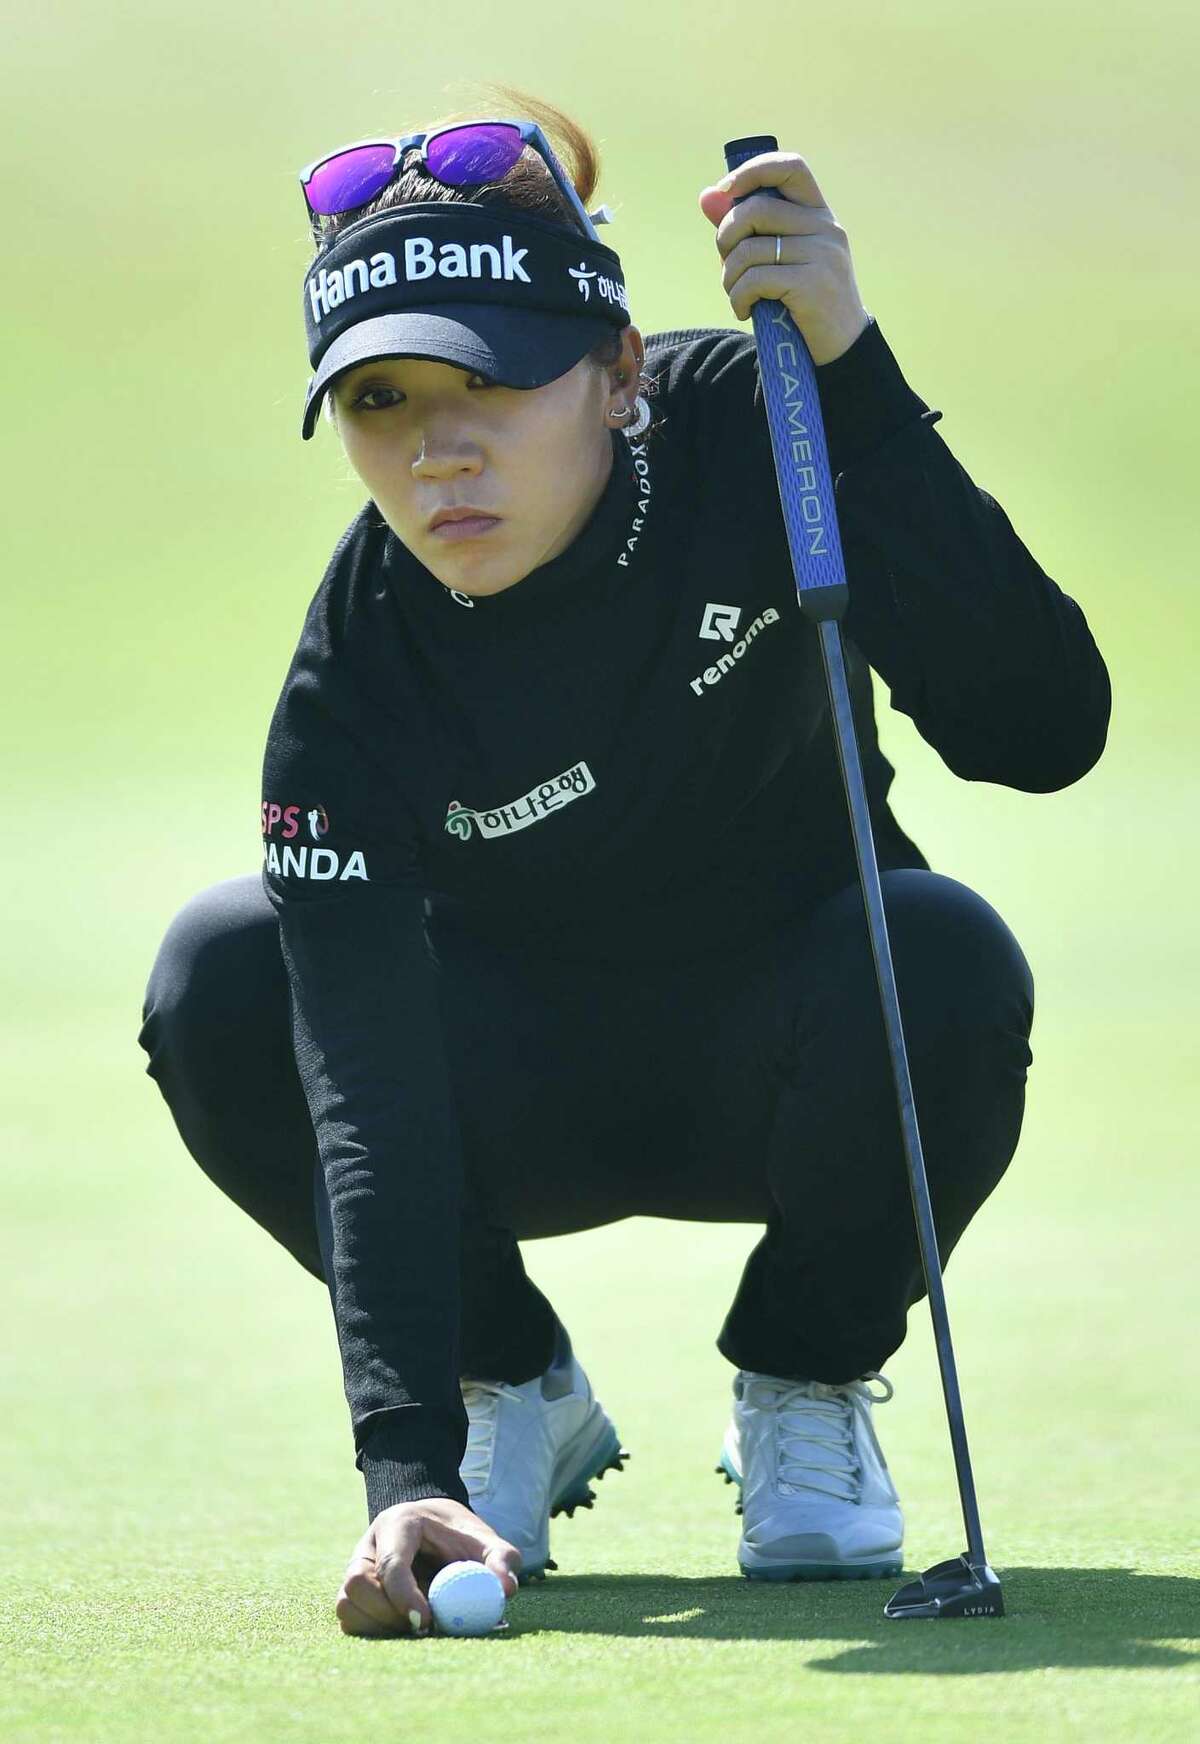 TROON, SCOTLAND - JULY 29: Lydia Ko of New Zealand lines up a putt at the 1st hole during round two of the Trust Golf Women's Scottish Open at Dundonald Links Golf Course on July 29, 2022 in Troon, Scotland. (Photo by Mark Runnacles/Getty Images)